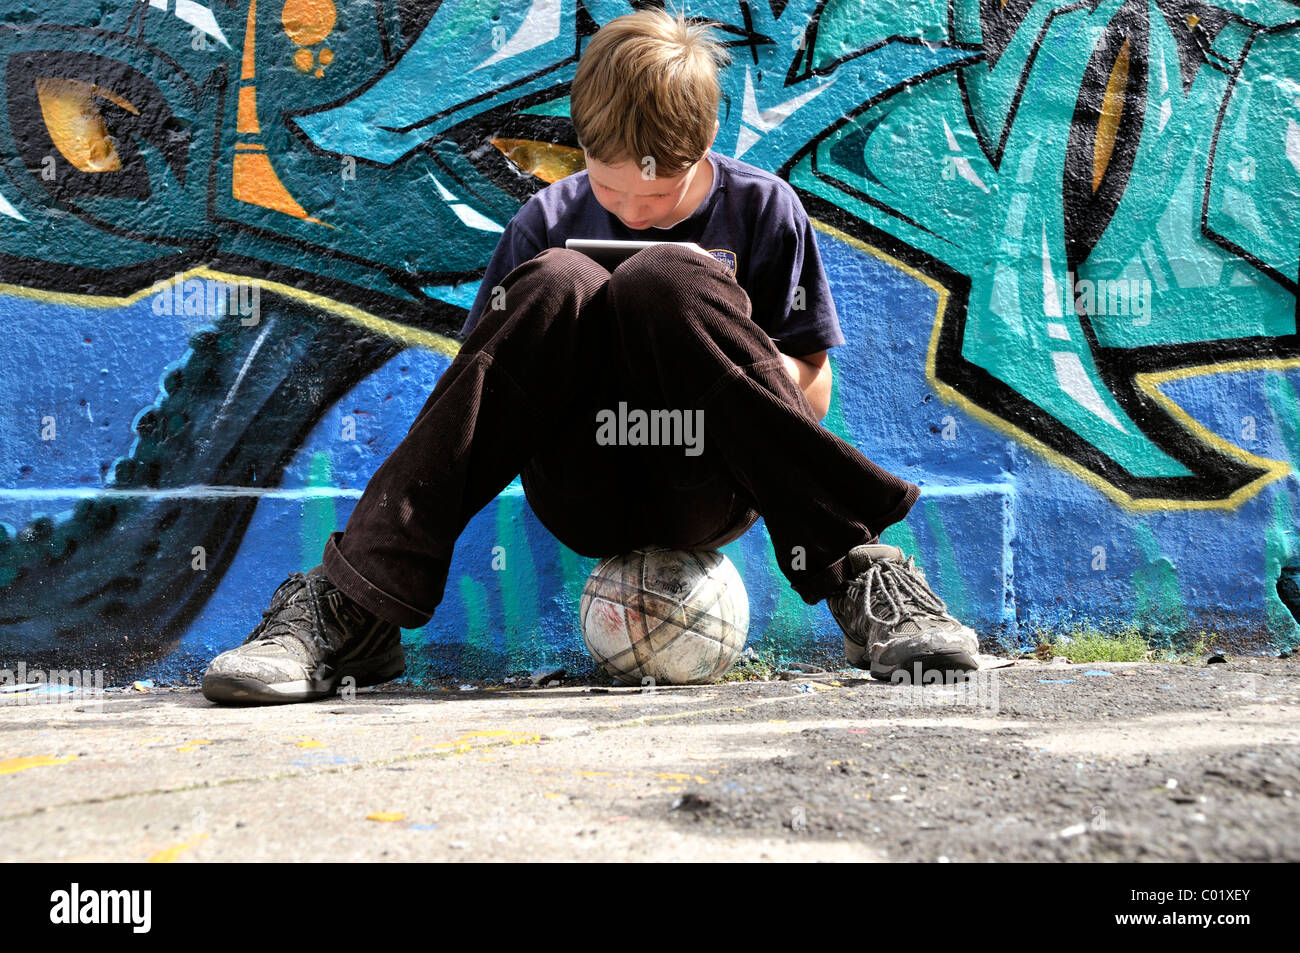 Ten-year-old boy playing with his Nintendo in front of a graffiti wall, Germany, Europe Stock Photo